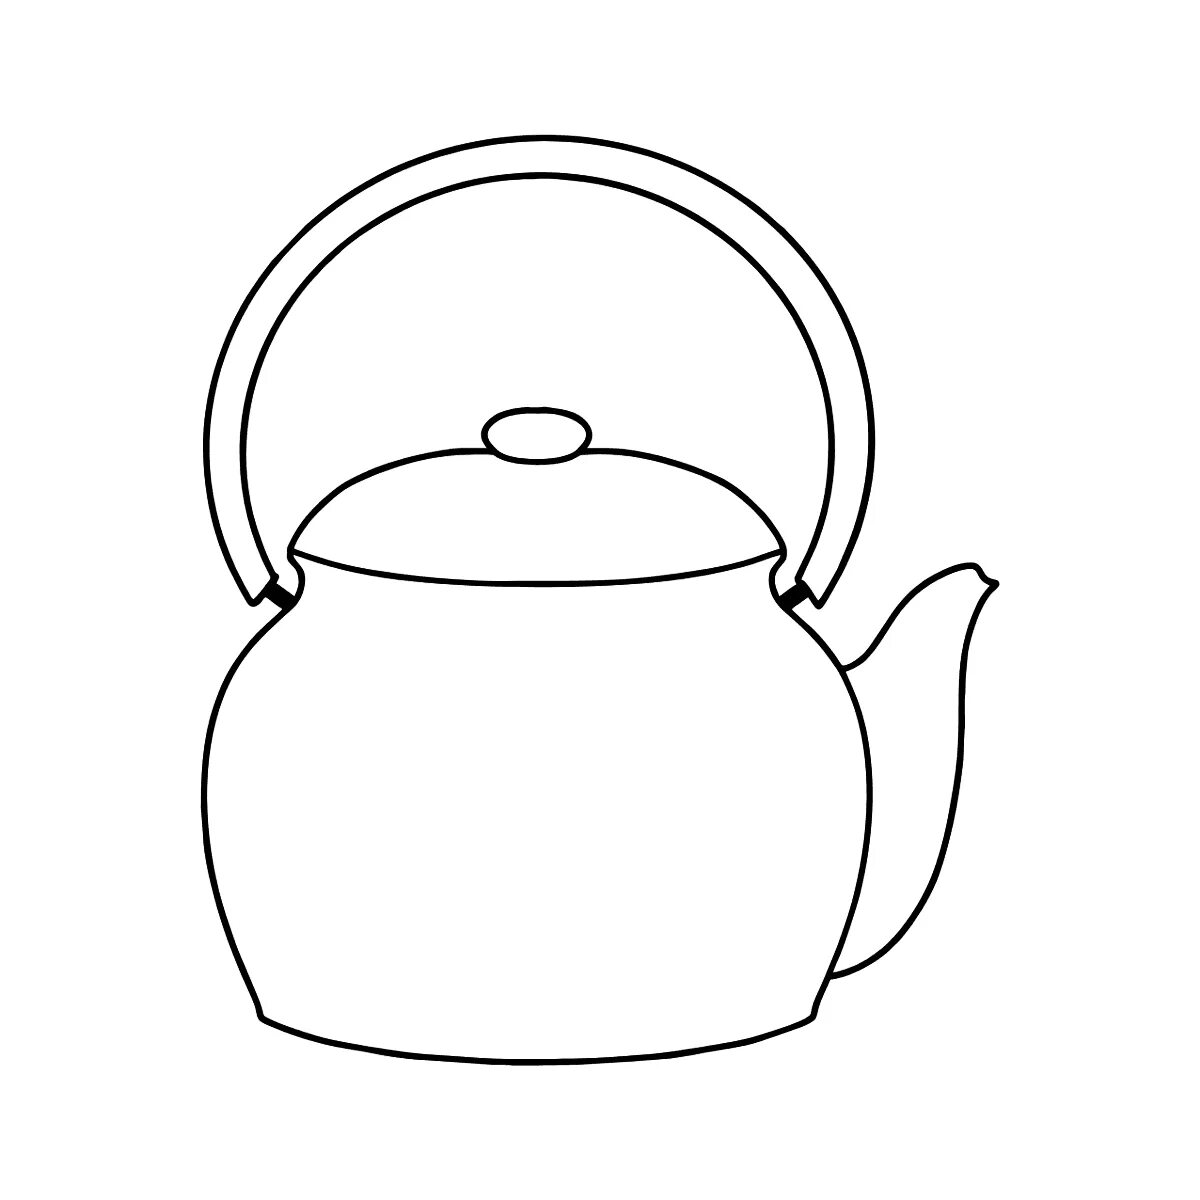 Glamour teapot coloring page for 2-3 year olds